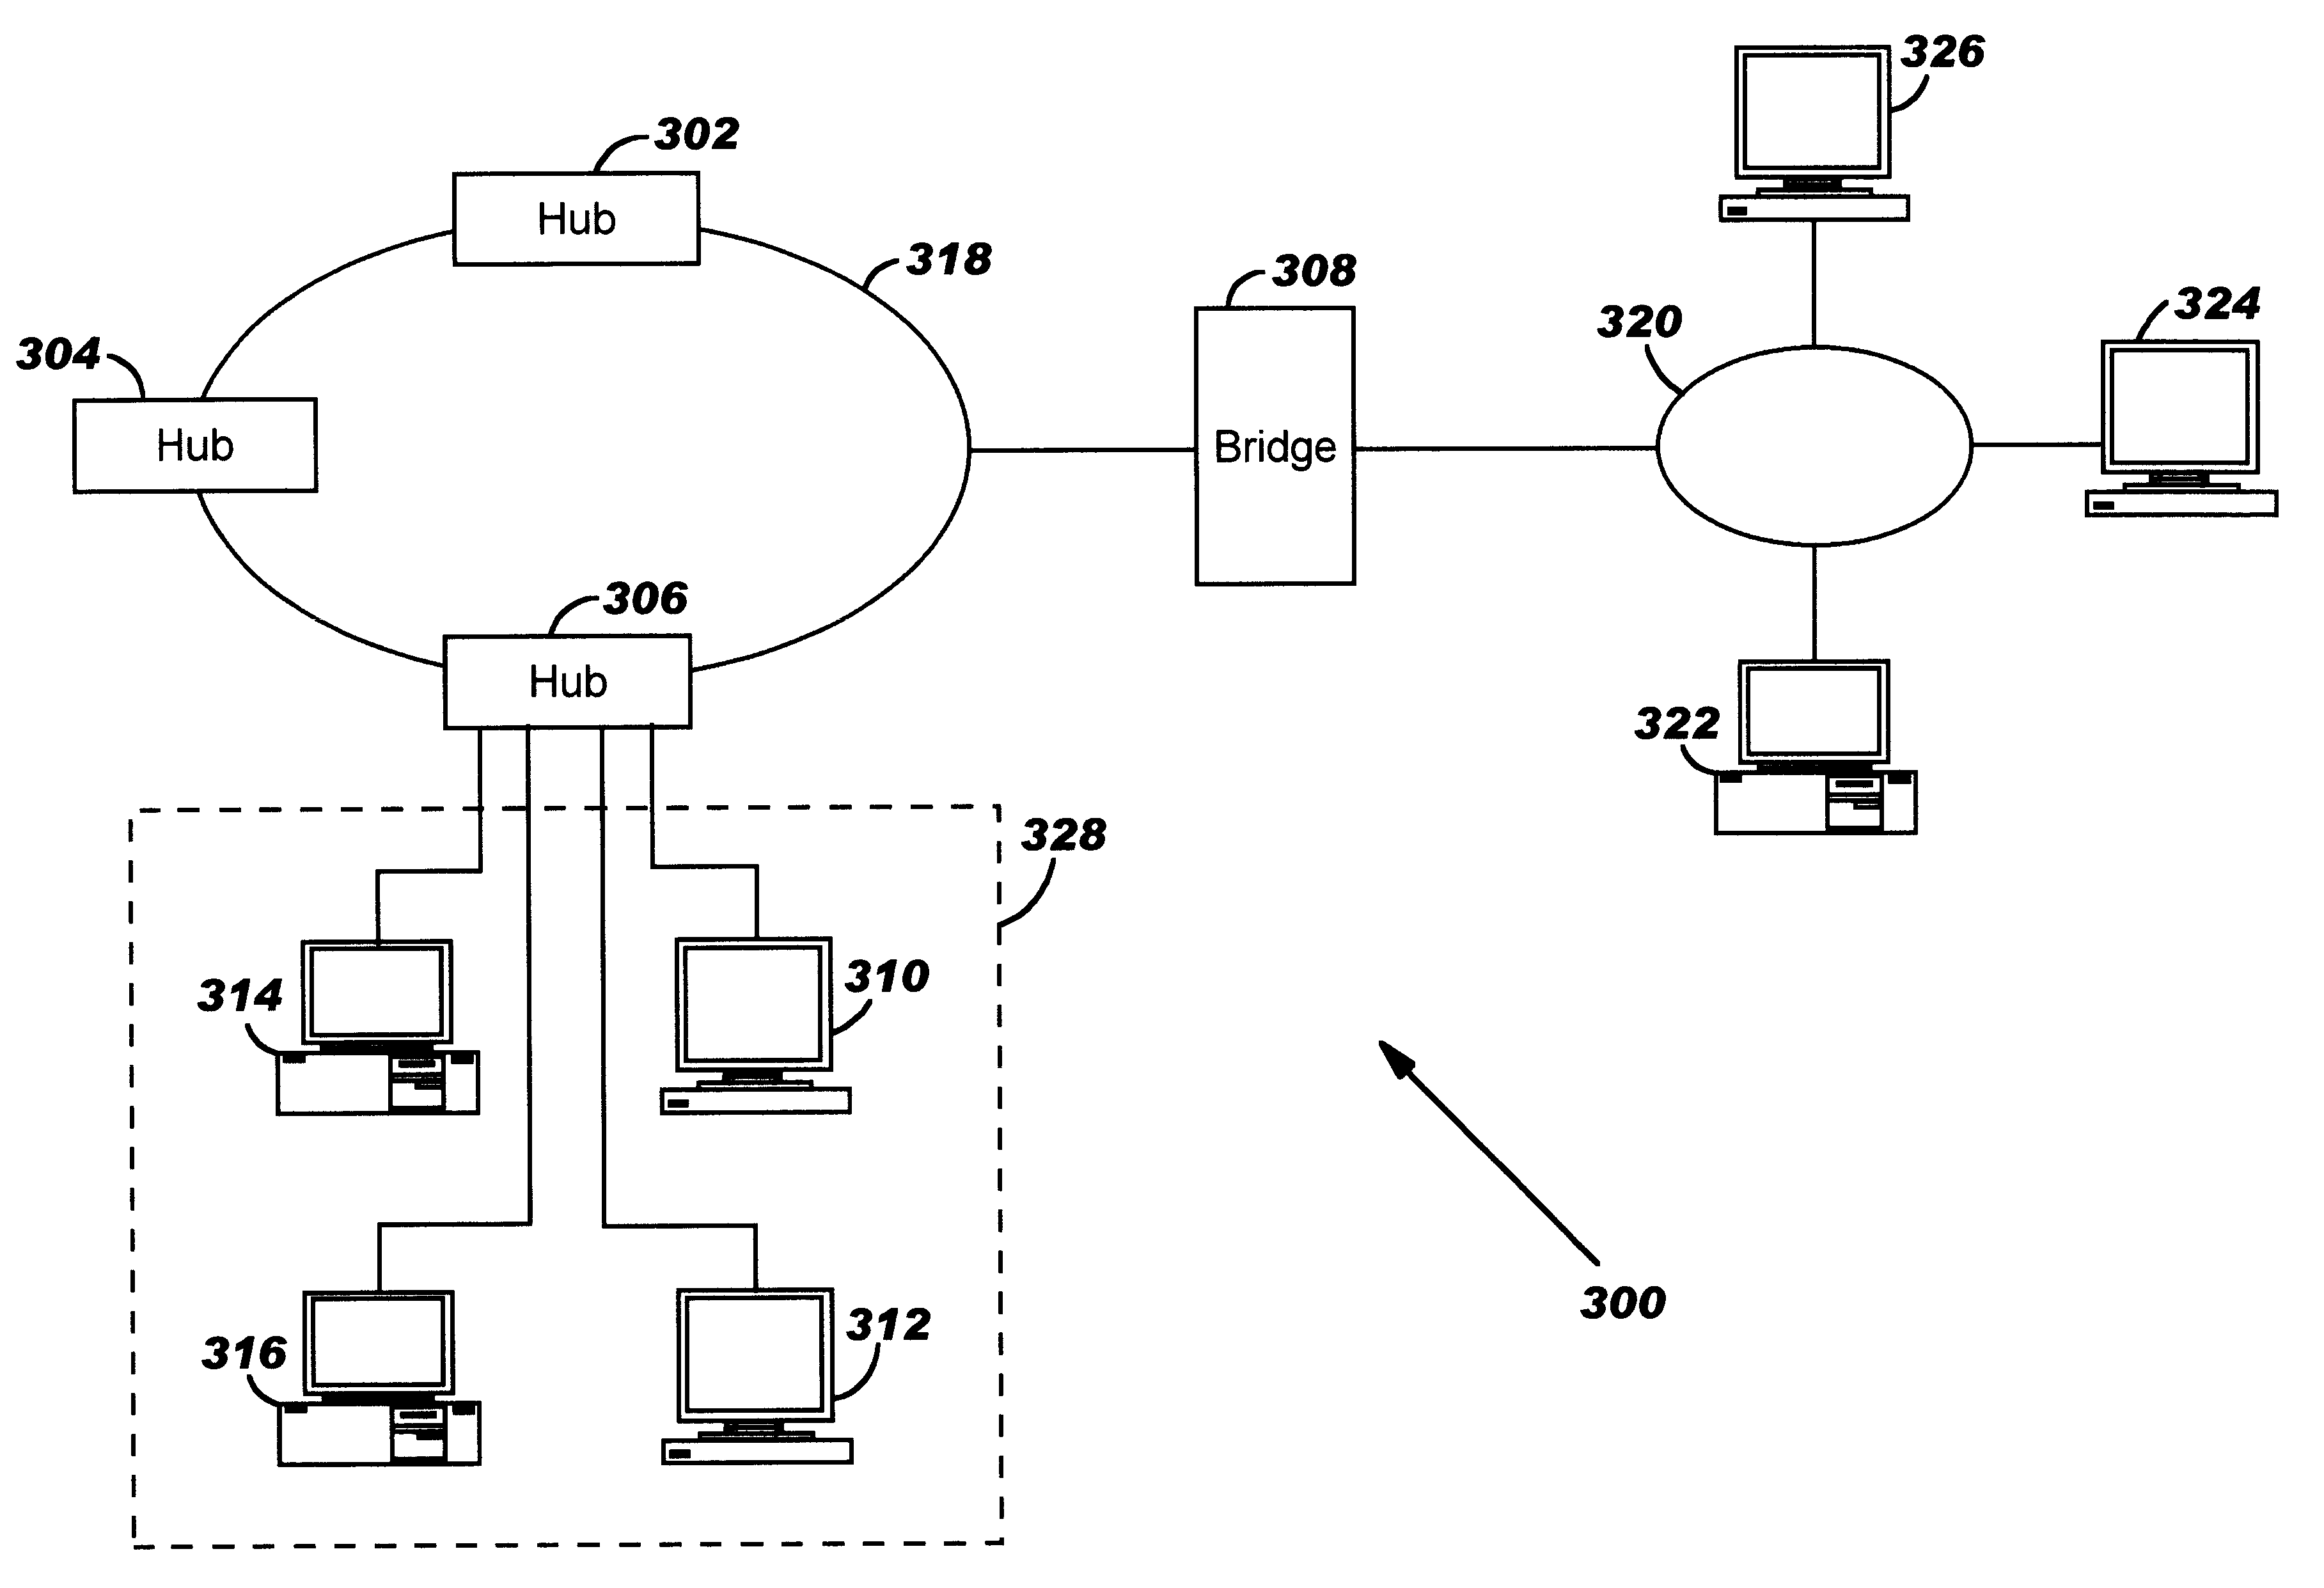 Token ring network topology discovery and display